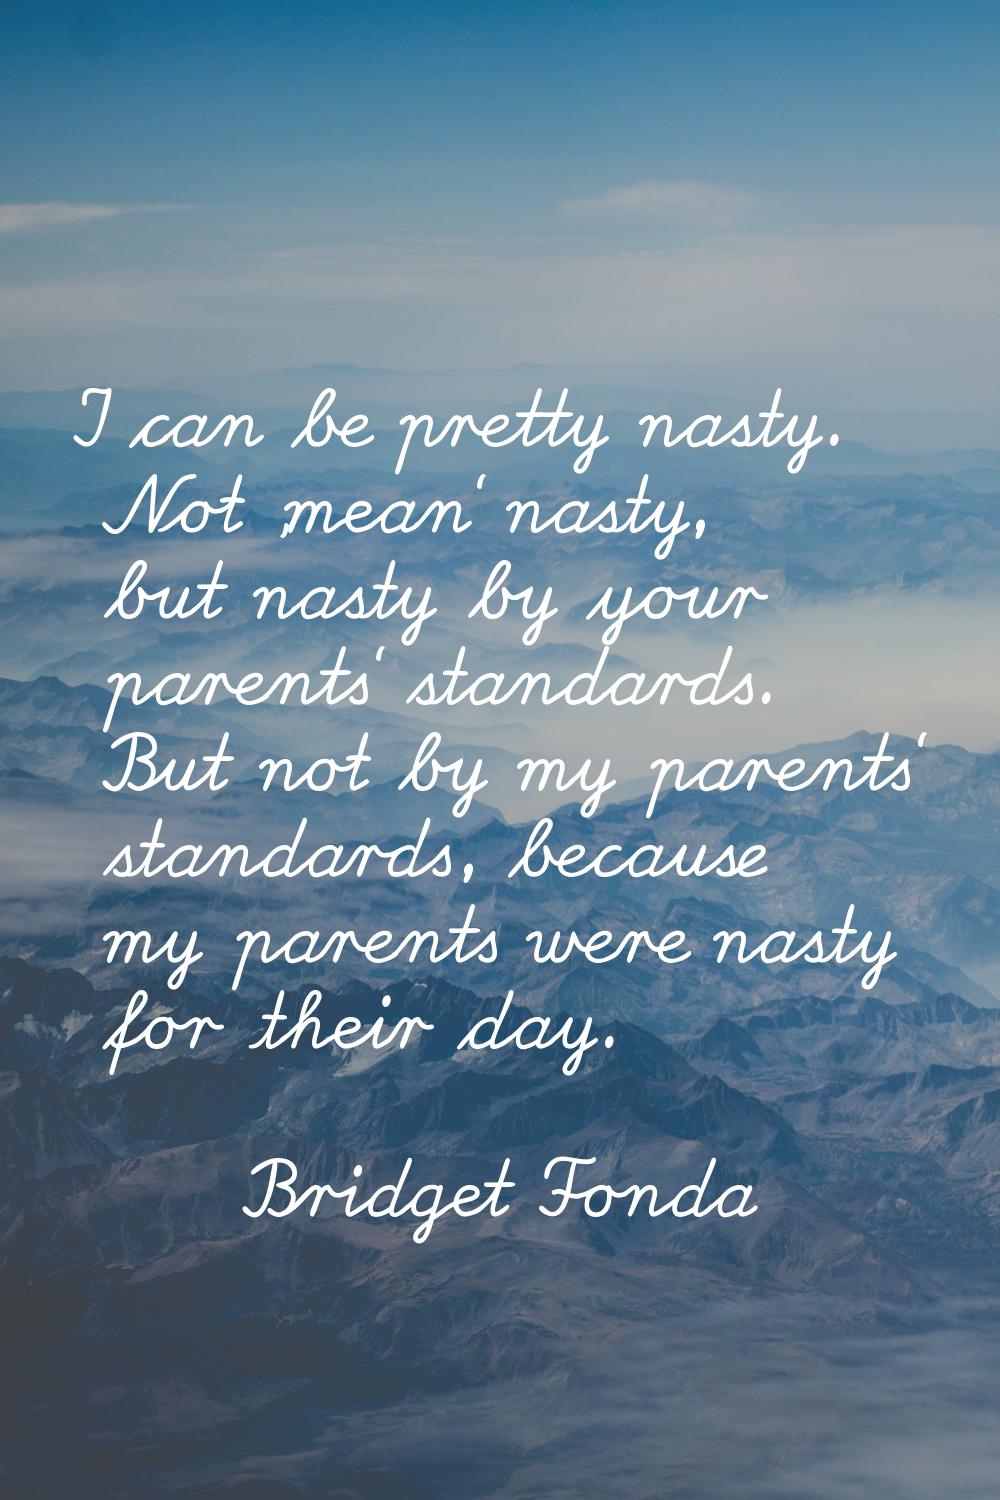 I can be pretty nasty. Not 'mean' nasty, but nasty by your parents' standards. But not by my parent